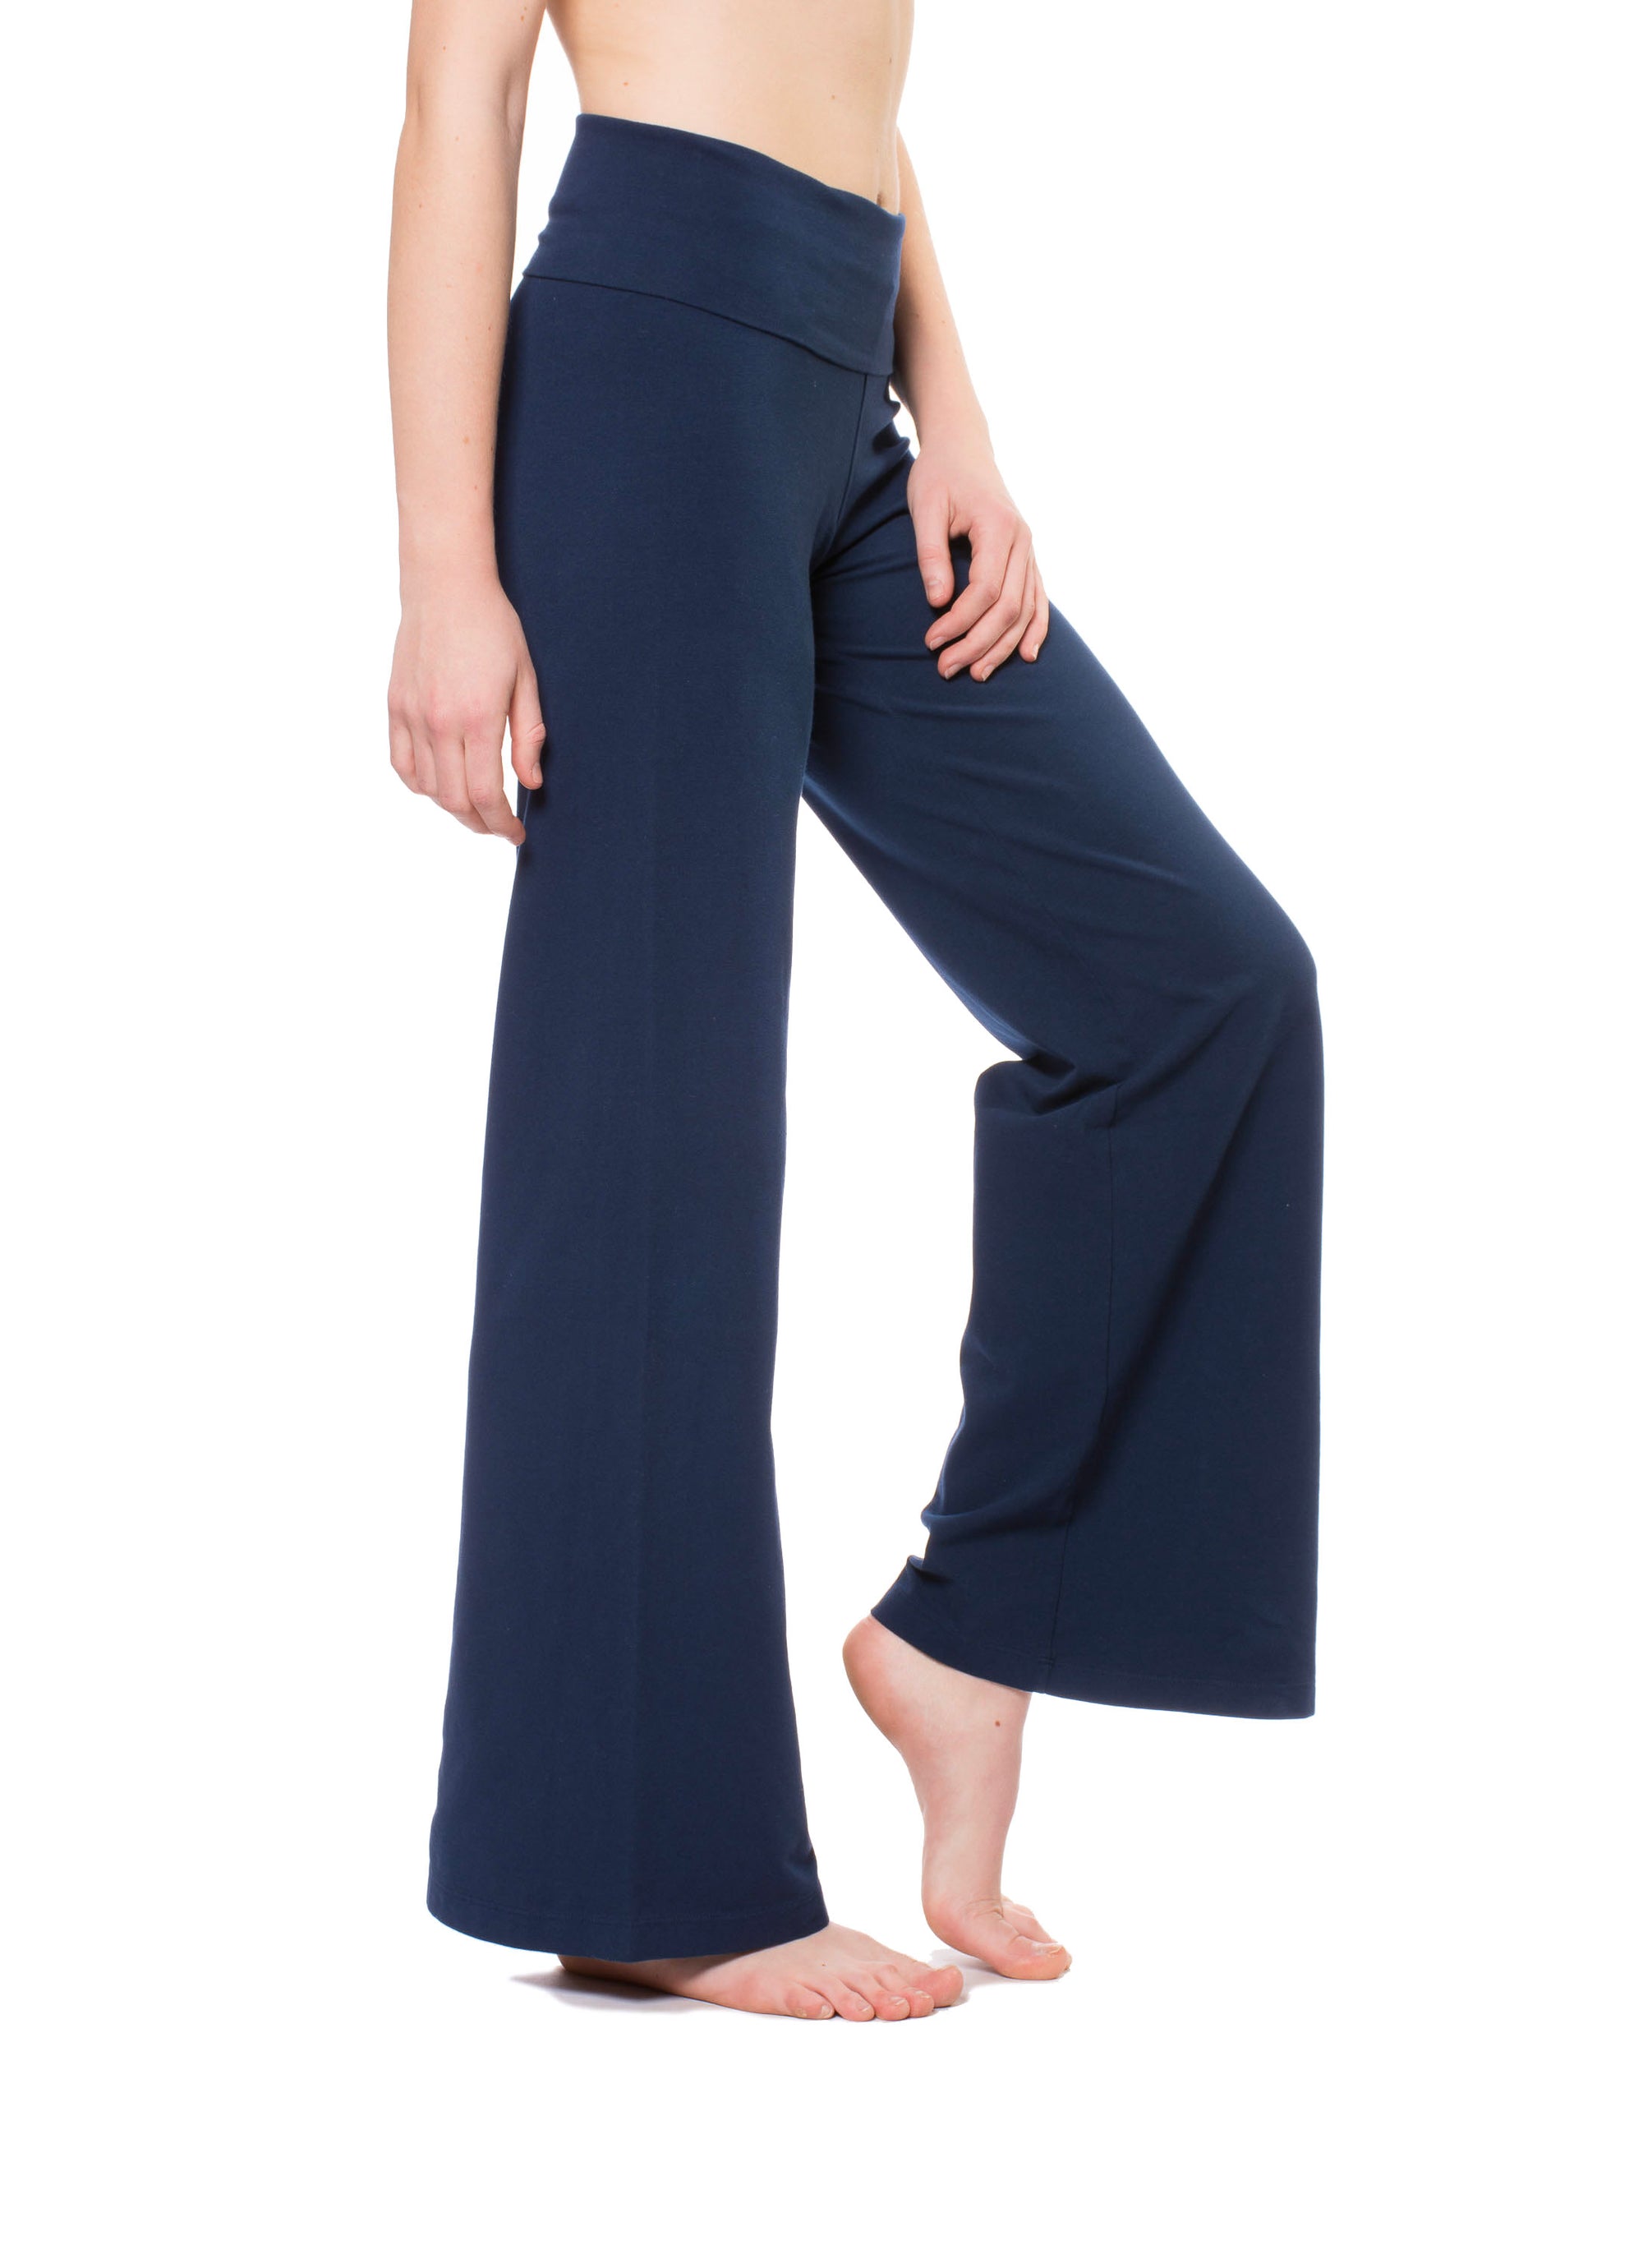 Wide Leg Roll Down Pants (Style W-326, Midnight Blue) by Hard Tail Forever